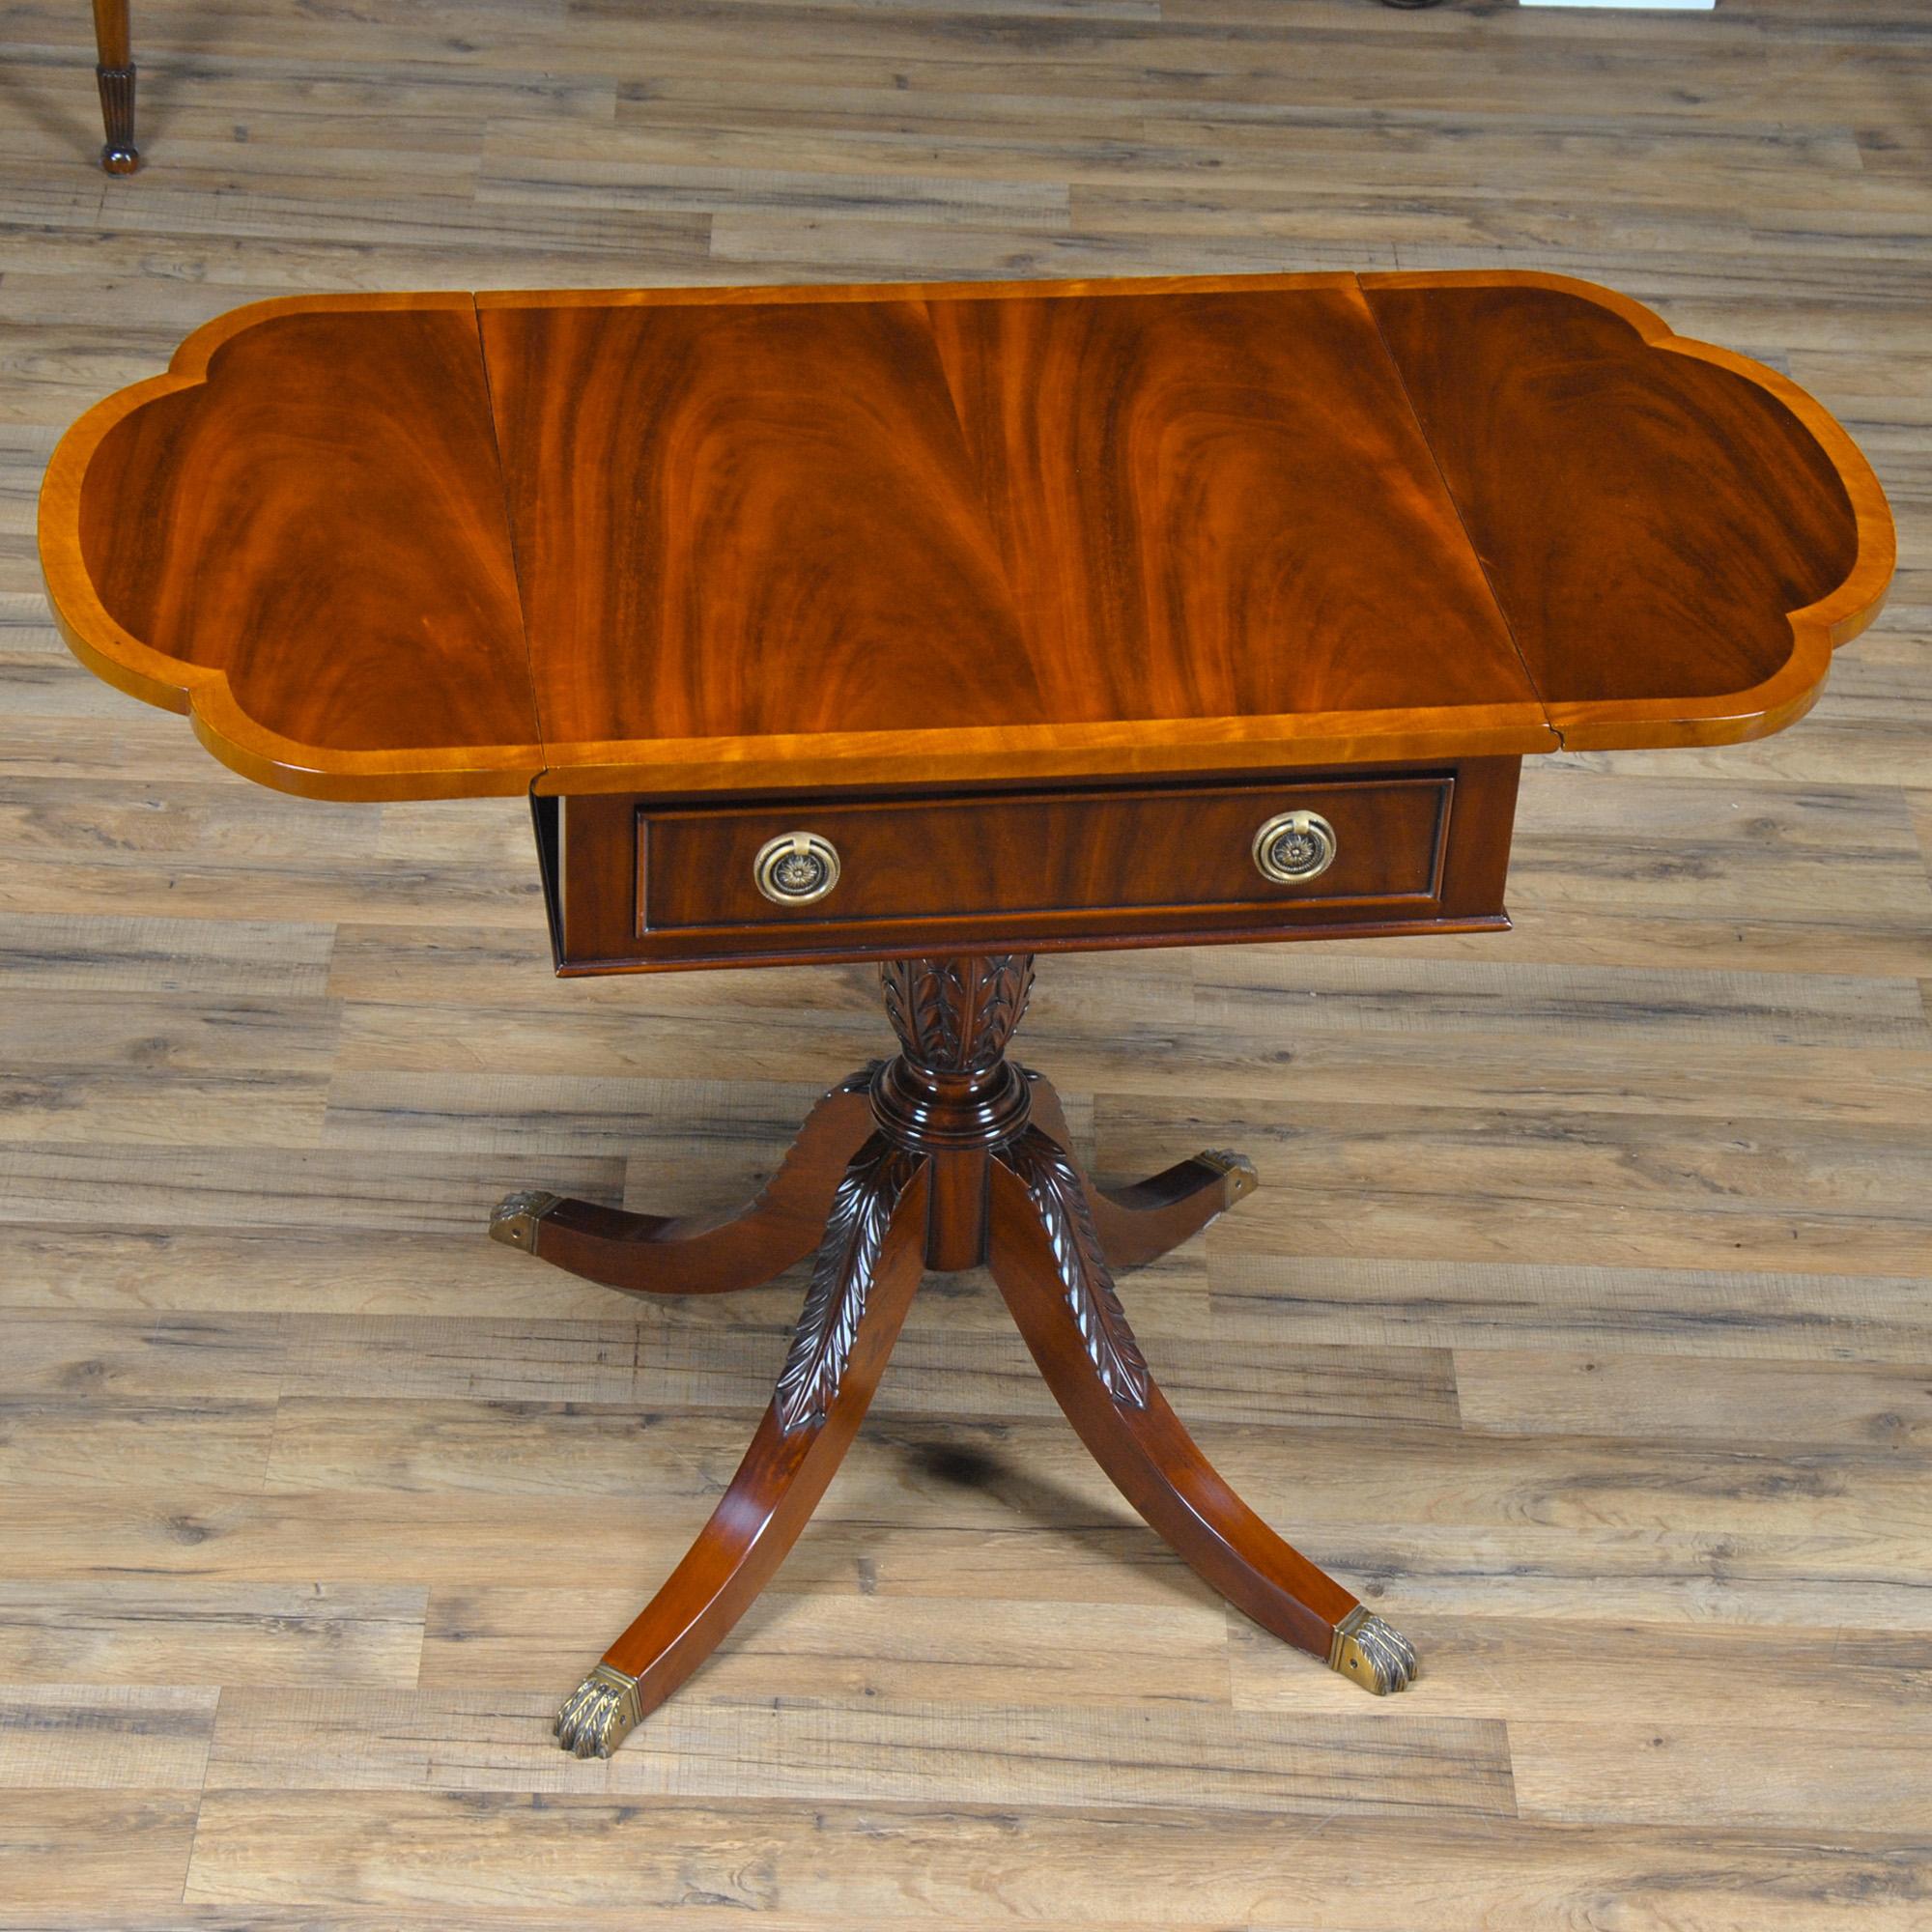 A large Duncan Phyfe style Dropside Table from Niagara Furniture with a beautifully crafted top featuring figural mahogany and satinwood, a dovetailed drawer and two fold down dropside leaves supported by solid mahogany arms when opened. The base of